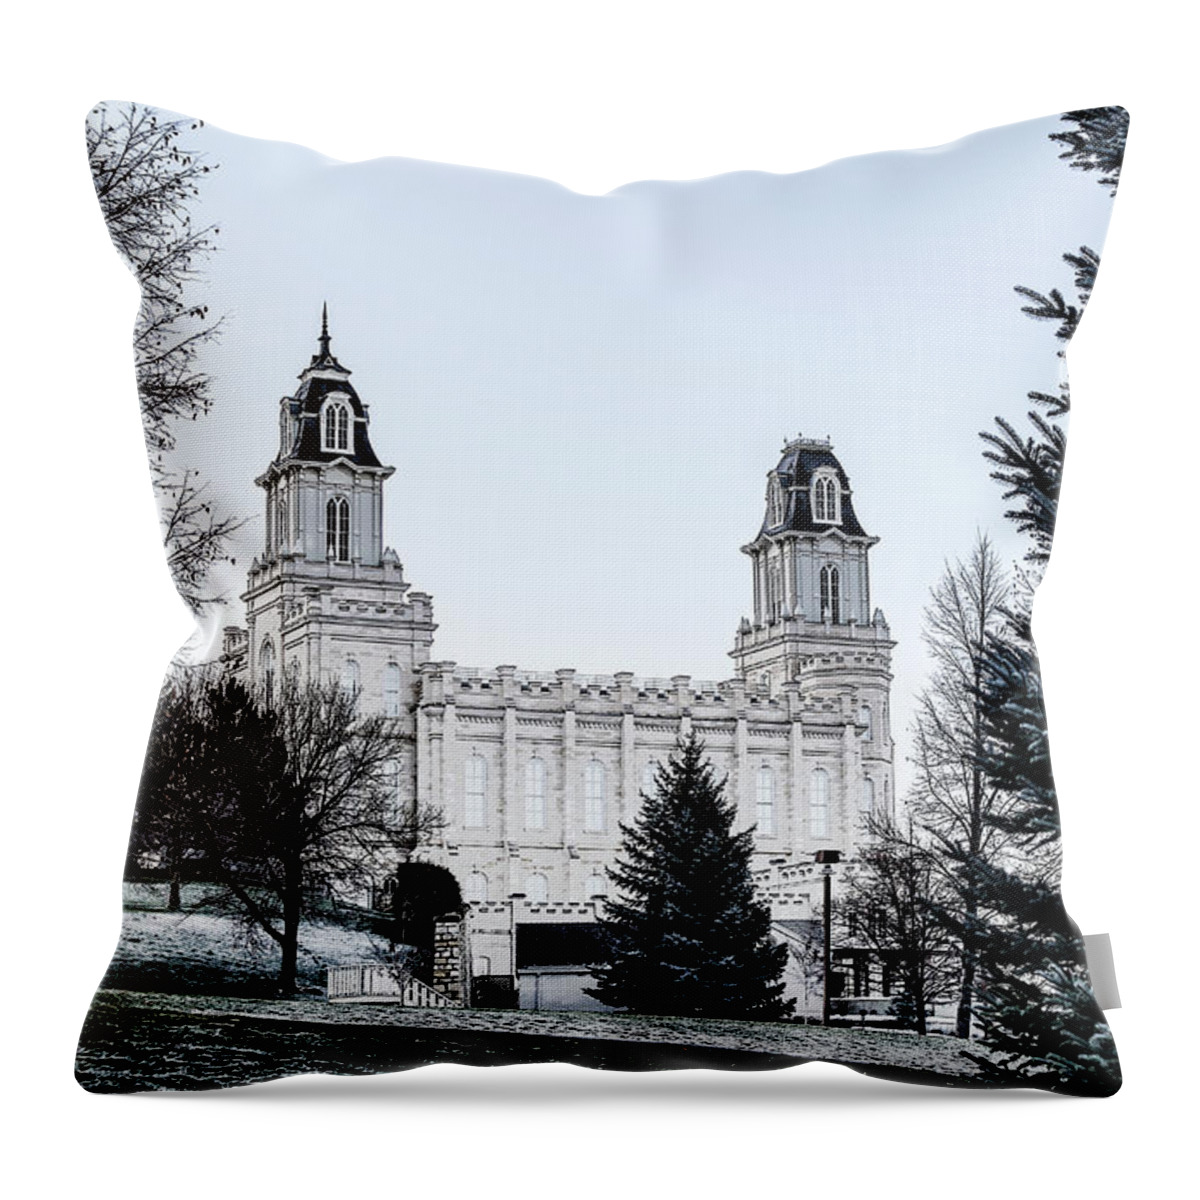 Blue Sky Throw Pillow featuring the digital art Manti Temple on Thanksgiving Morning - Stylized by K Bradley Washburn